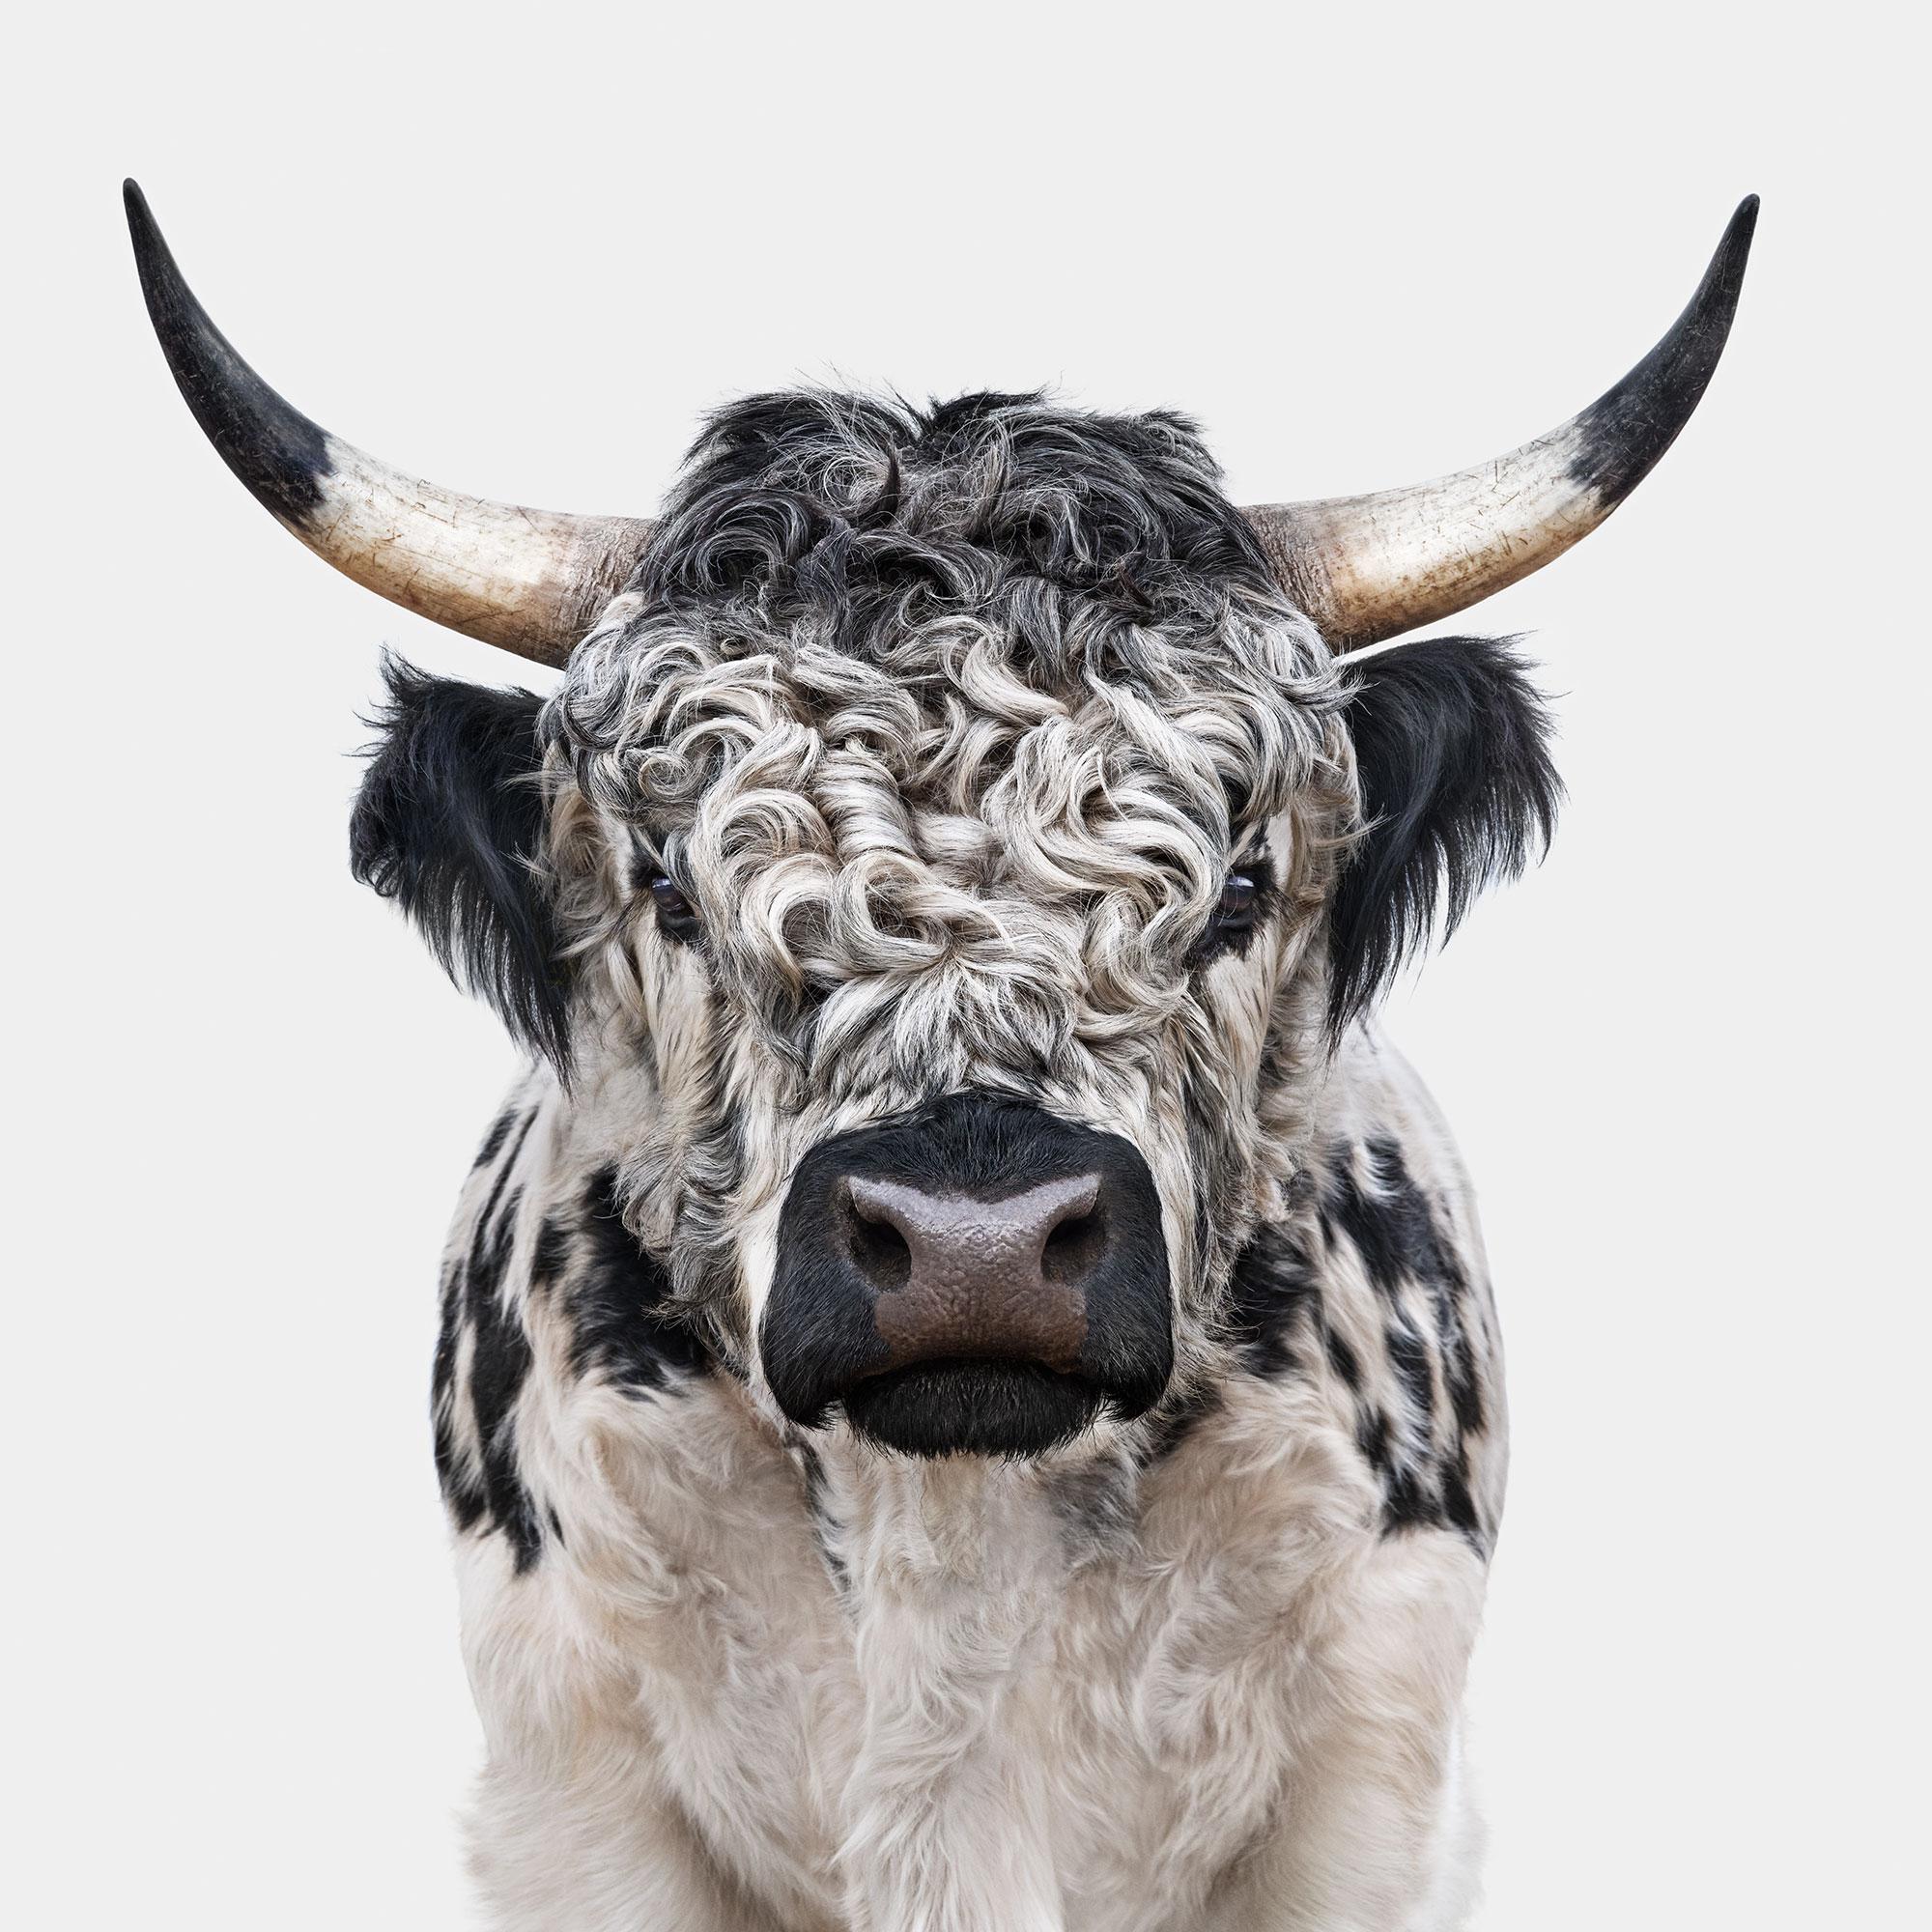 All available sizes and editions:
32 × 32 in, edition of 15
40 × 40 in, edition of 10
48 × 48 in, edition of 5

Whoa, Bull. In my years of photographing wild animals, I’ve learned to make quite a few noises to command their attention—but Murphy’s